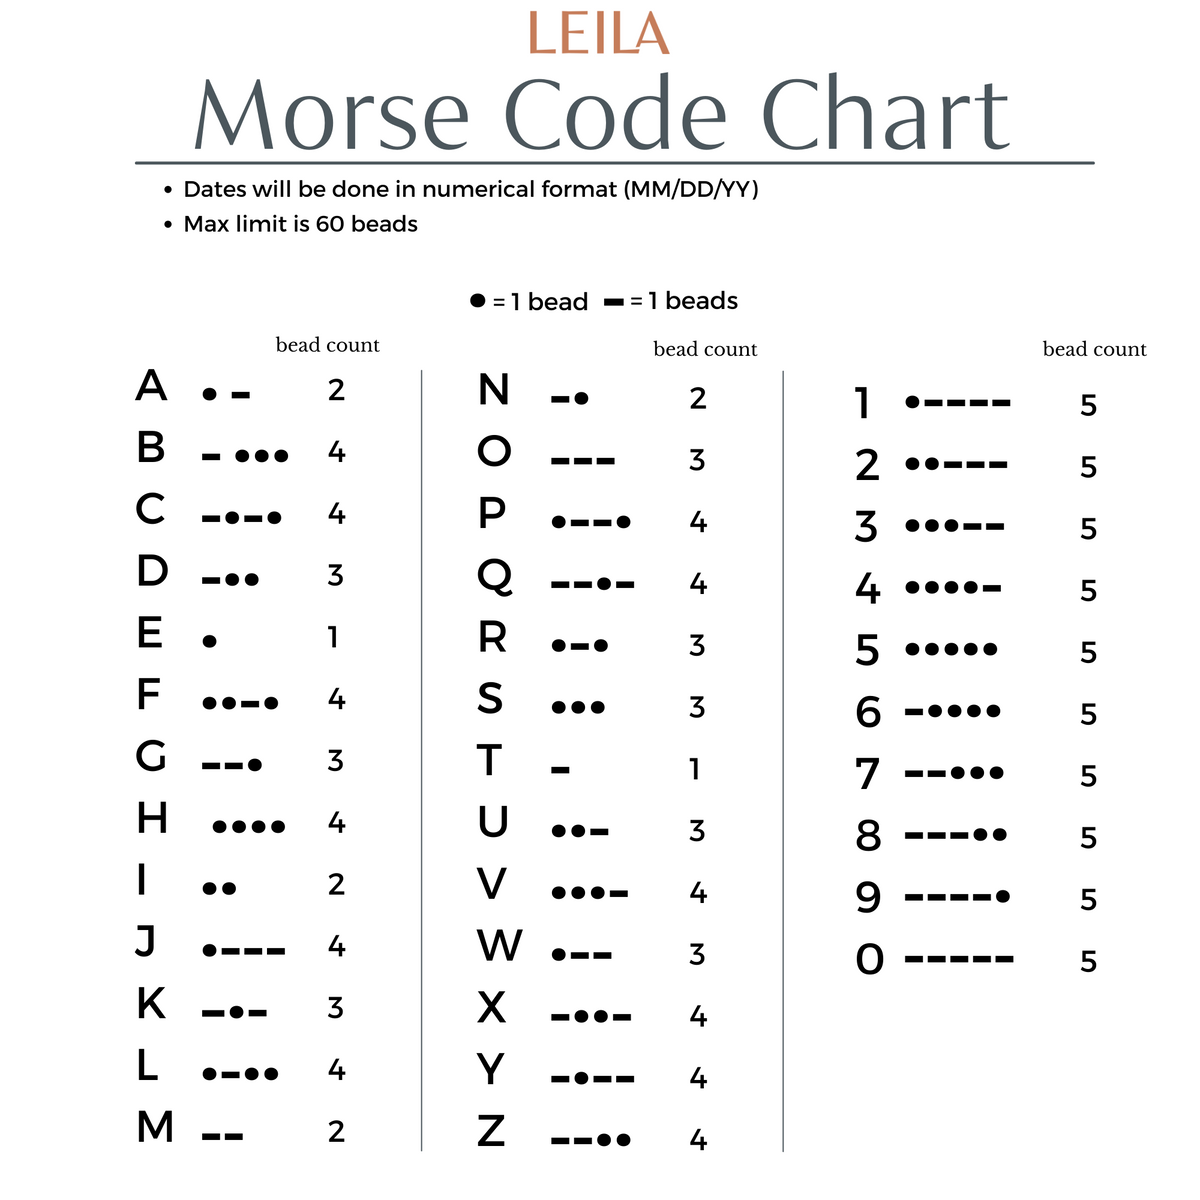 &quot;Mom of an Angel&quot; Morse Code